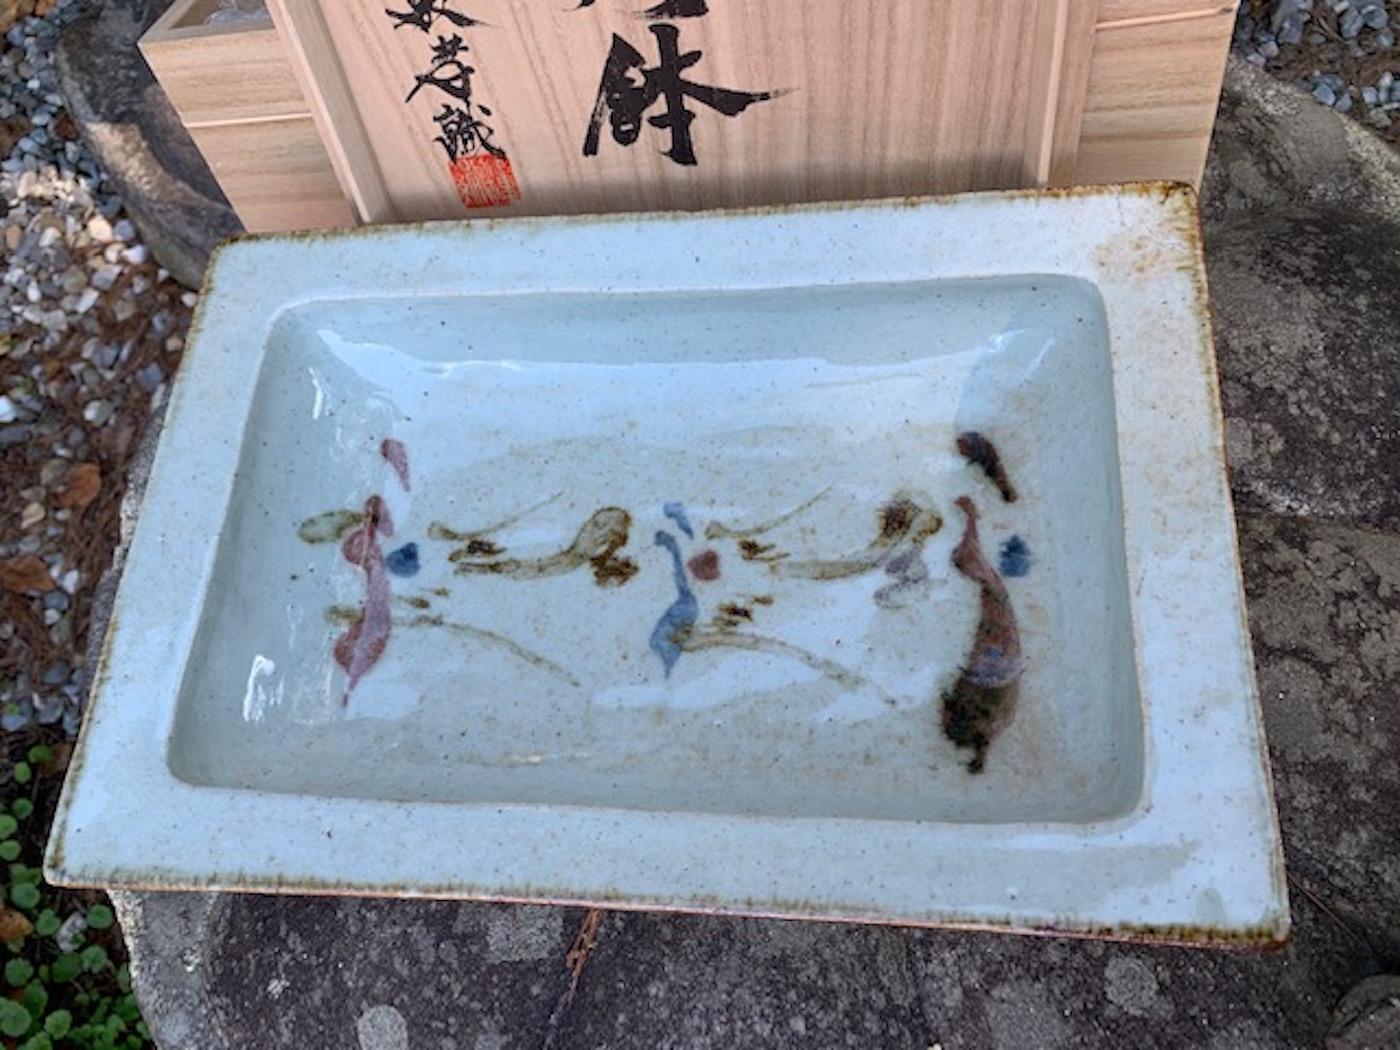 One of Japan's greatest Mingei artist's. Kanjiro, Kawai's work is so distinctive which is clear in all of his works; which includes calligraphy, wood carvings and ceramic sculpture. This platter is Classic Kanjiro work in shape and design.
   